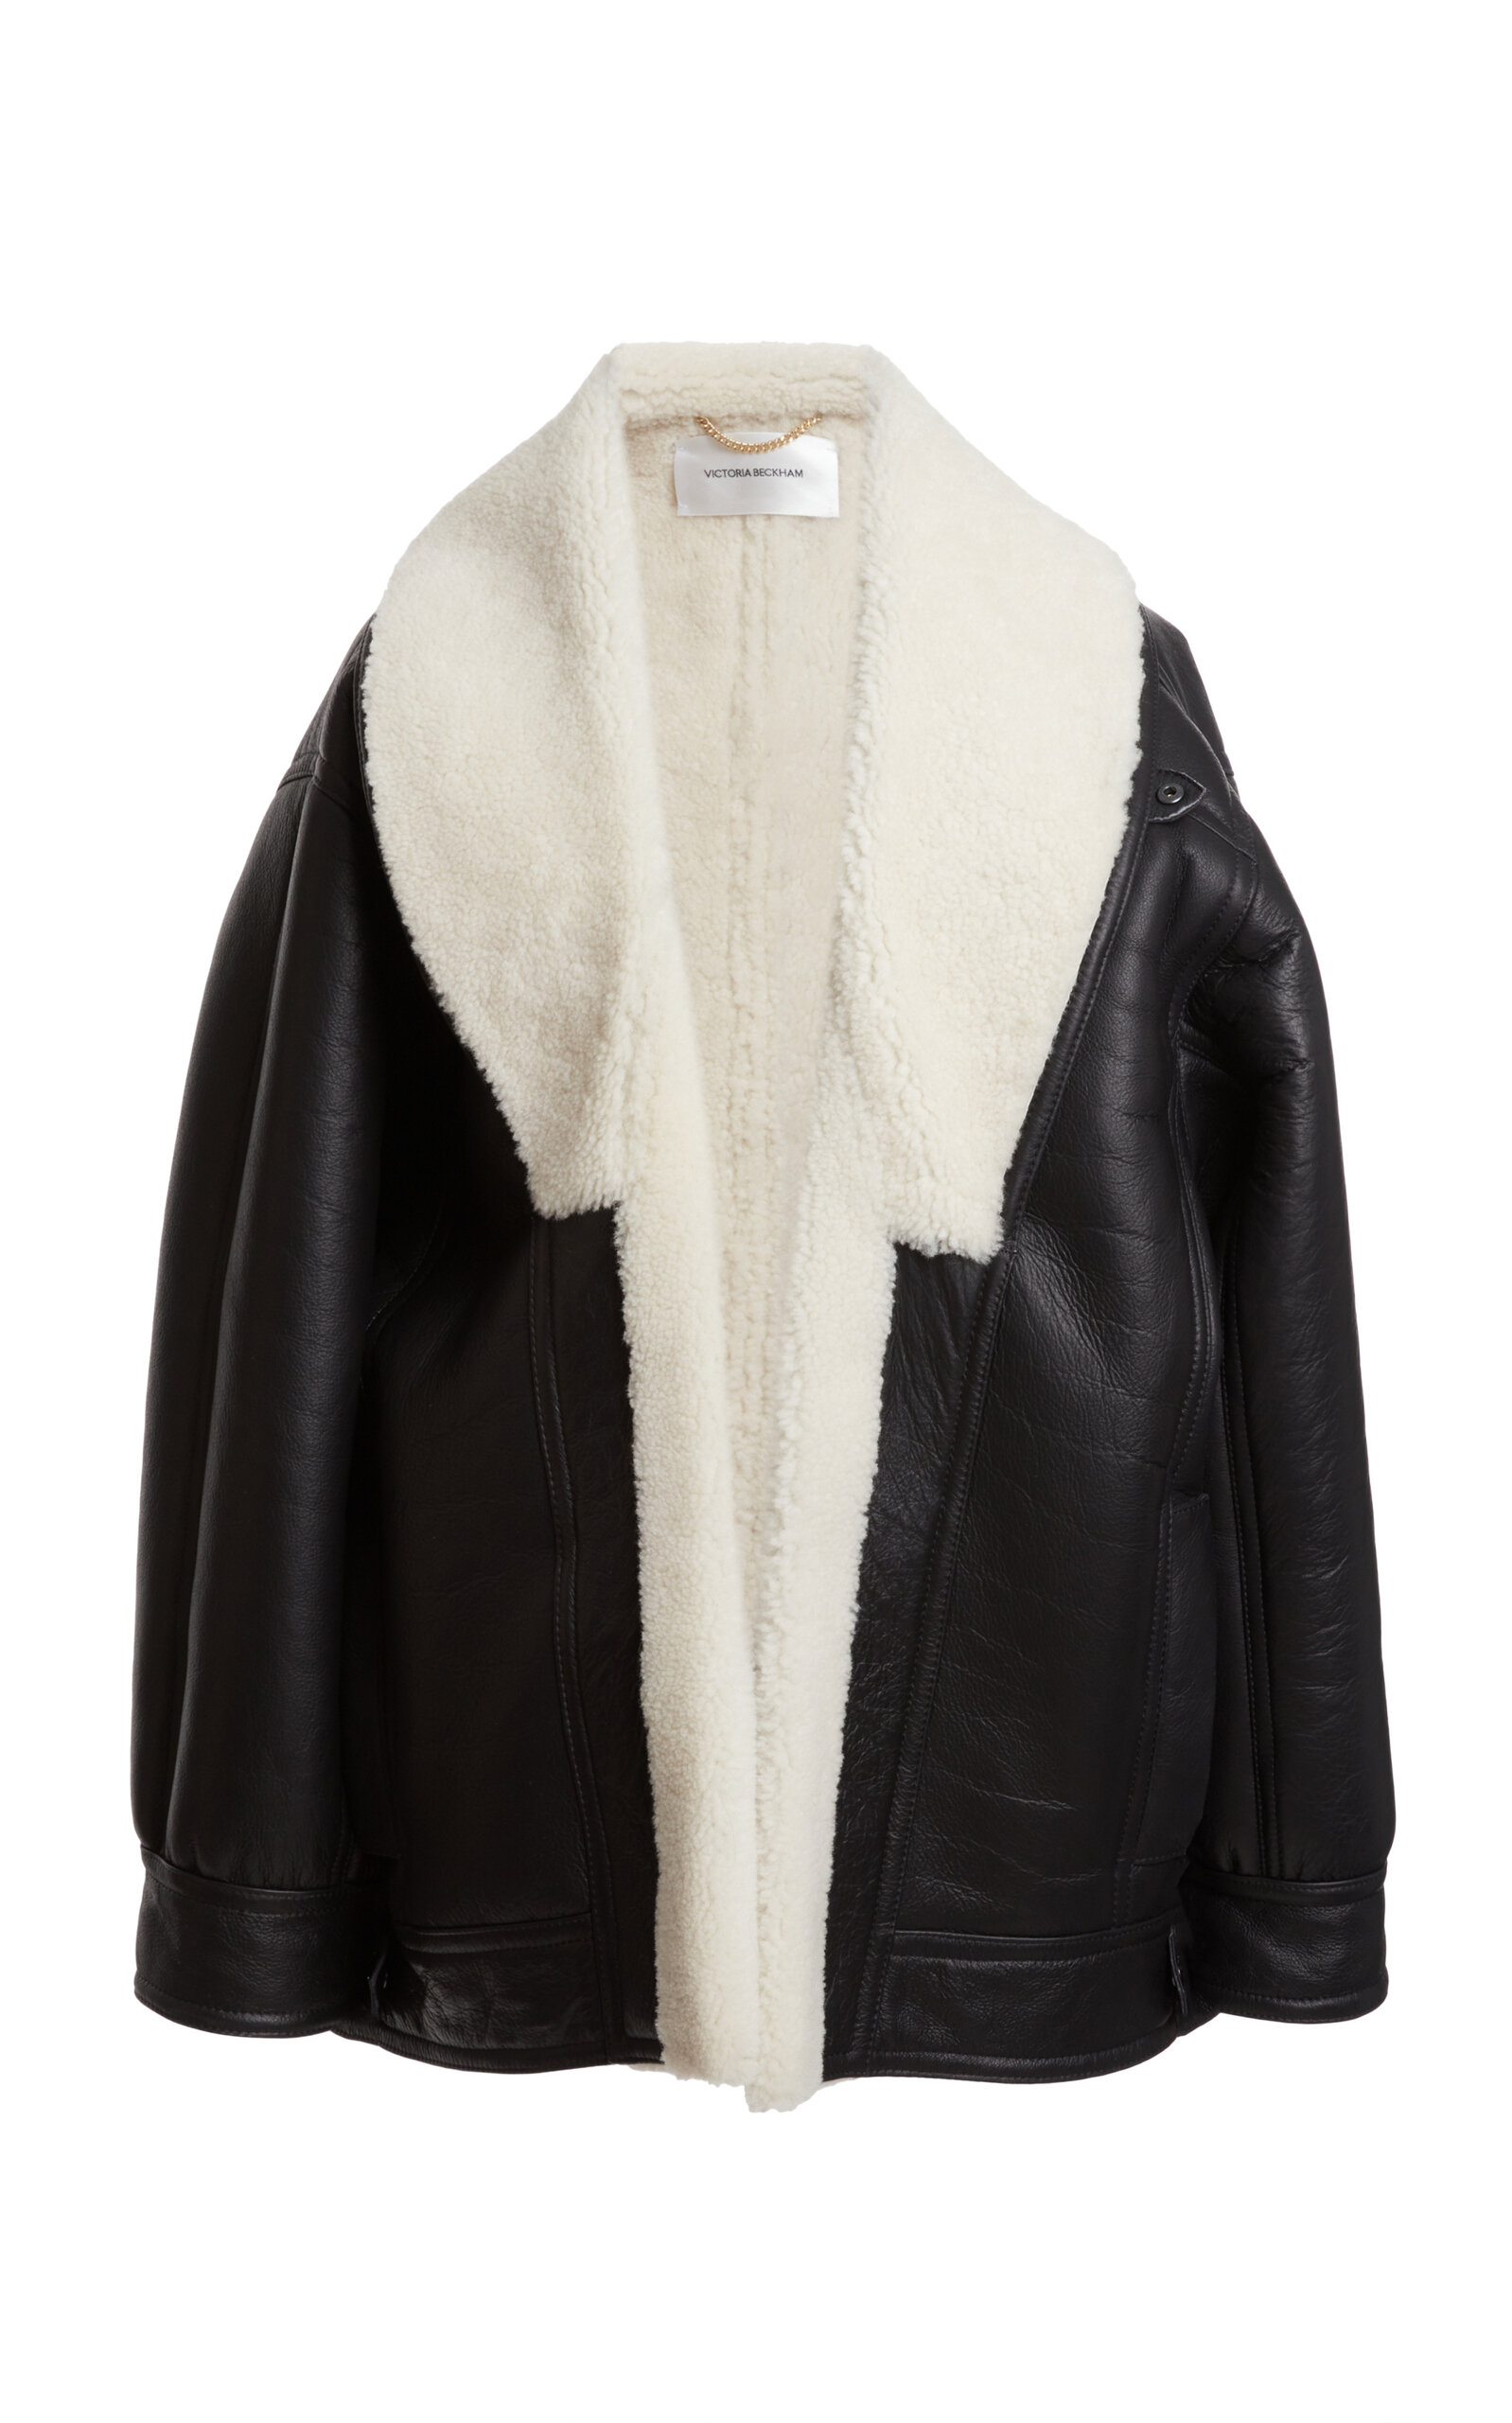 VICTORIA BECKHAM SHEARLING-LINED LEATHER JACKET